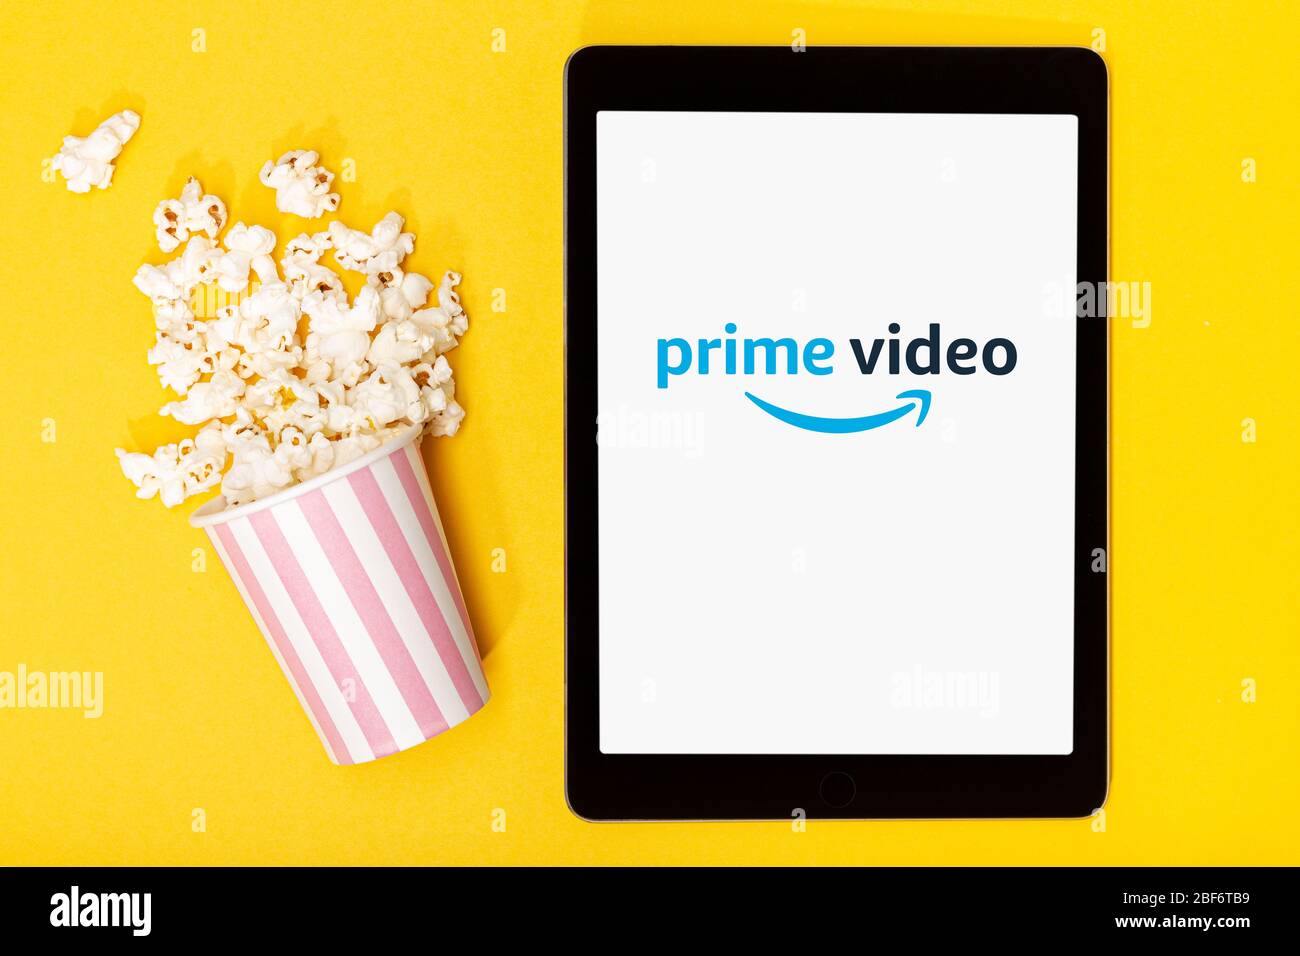 Galicia Spain March 9 Popcorn Bucket And Tablet With Amazon Prime Video Logo On Yellow Background Top View Stock Photo Alamy